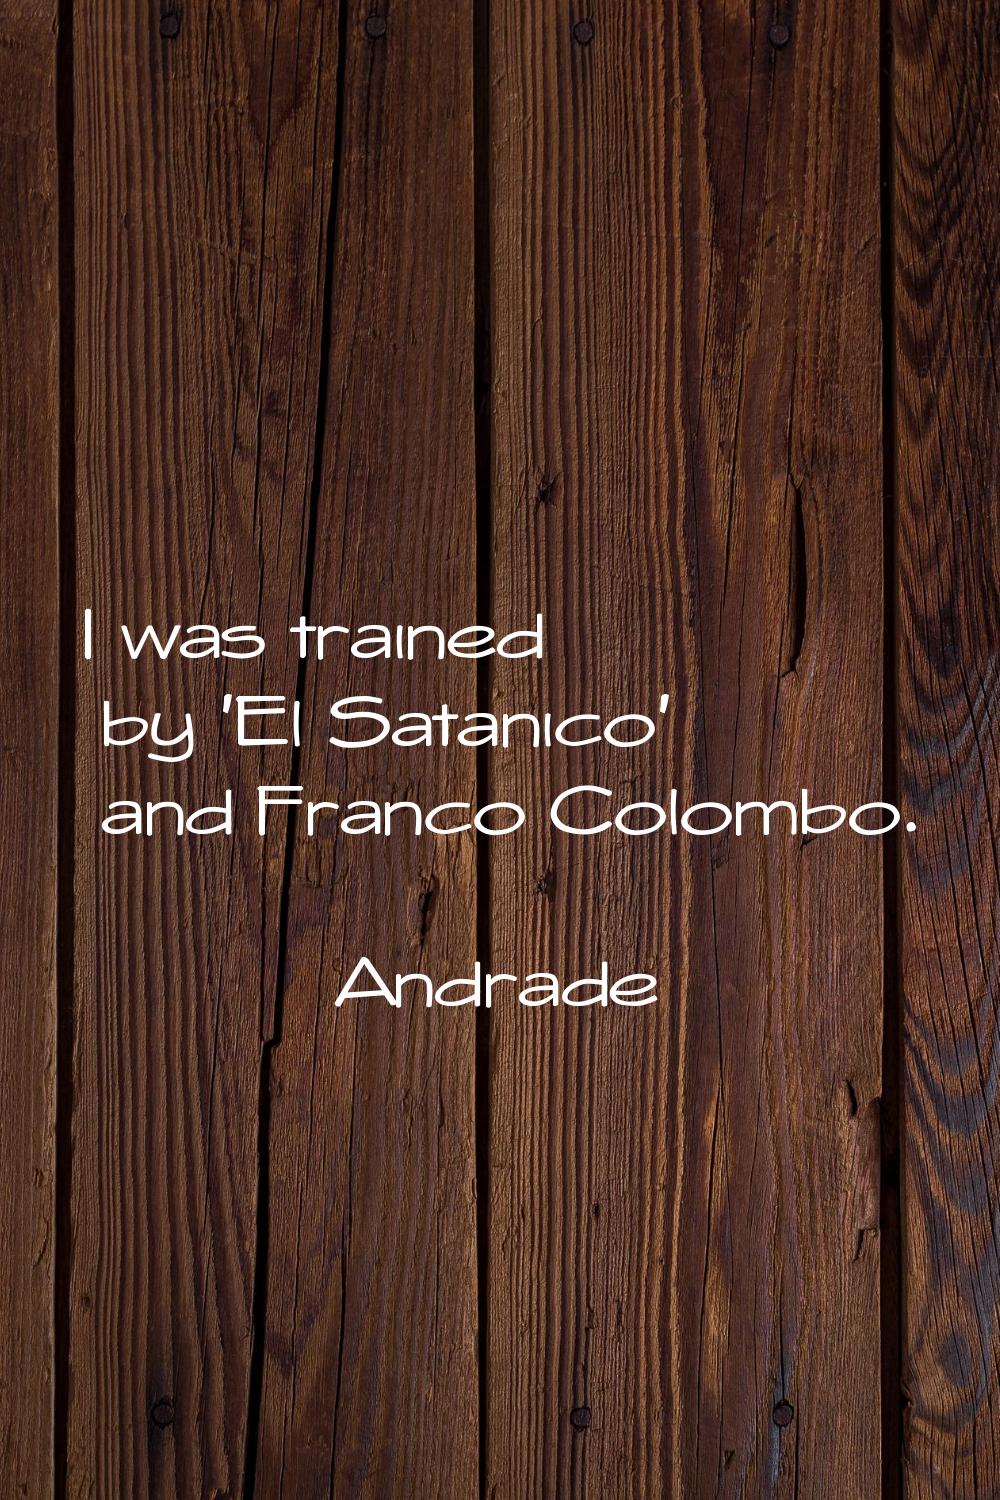 I was trained by 'El Satanico' and Franco Colombo.